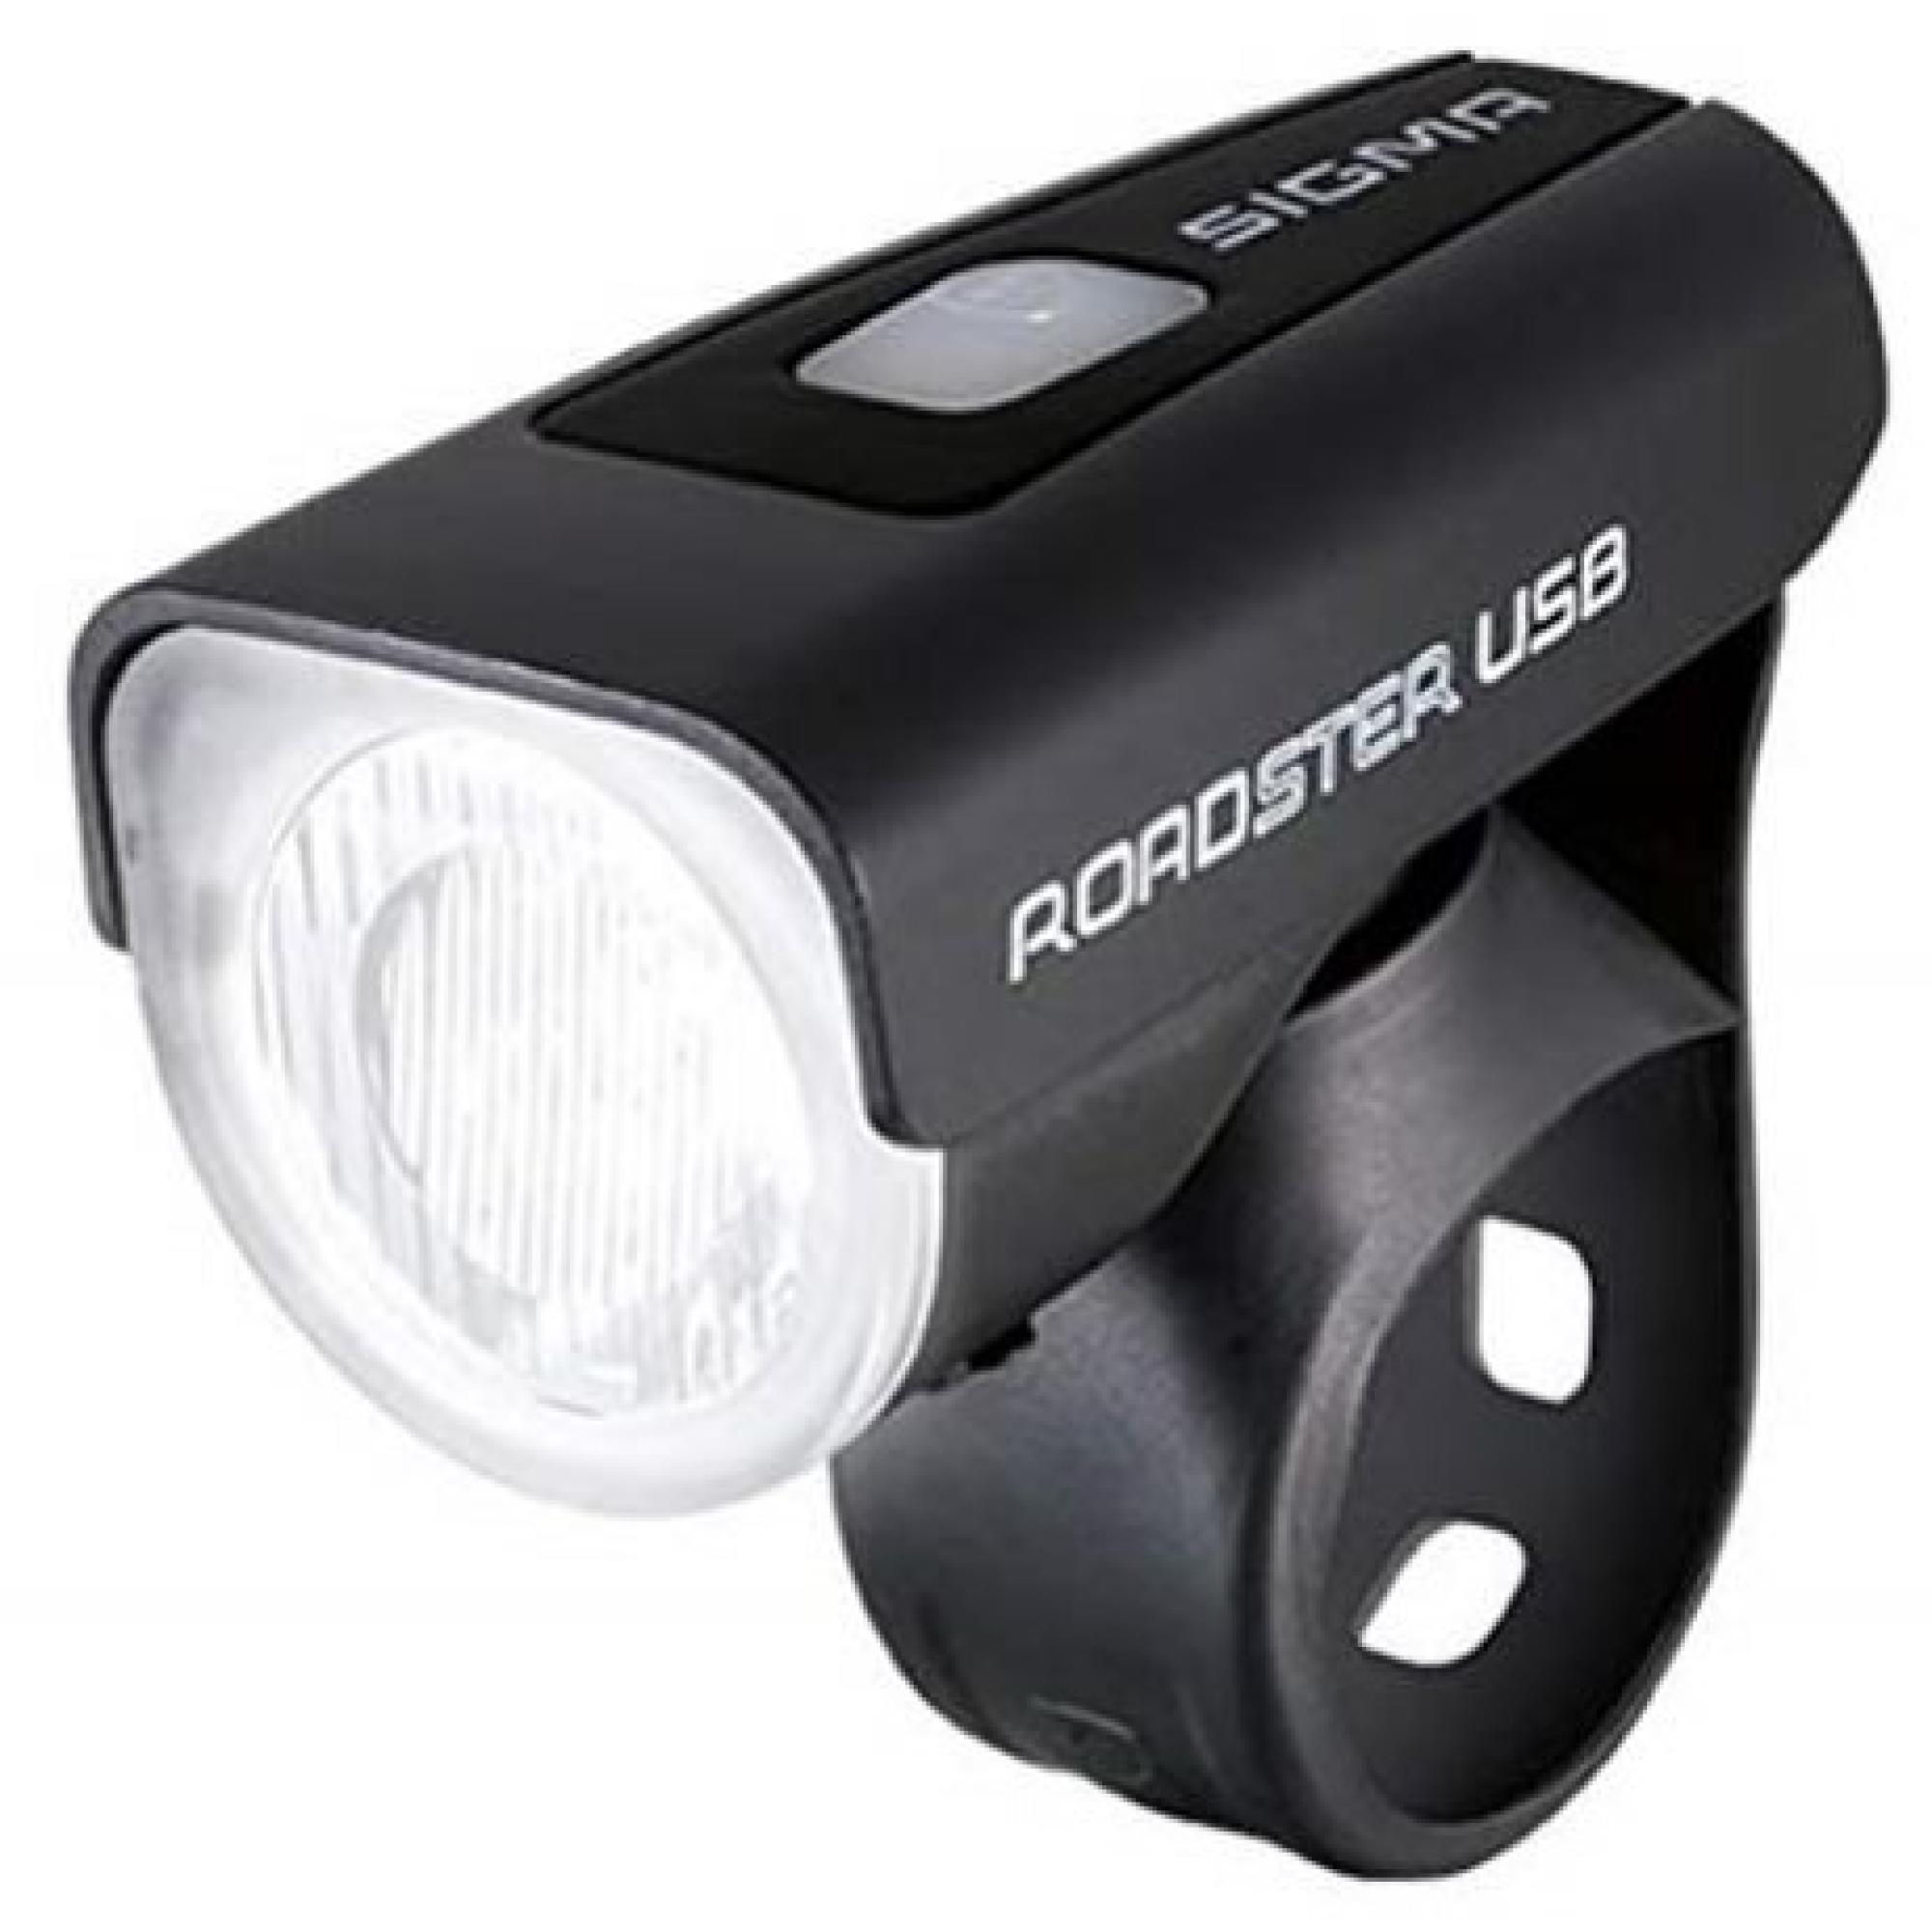 LED-Frontleuchte 'Roadster USB' schwarz 25 LUX + product picture